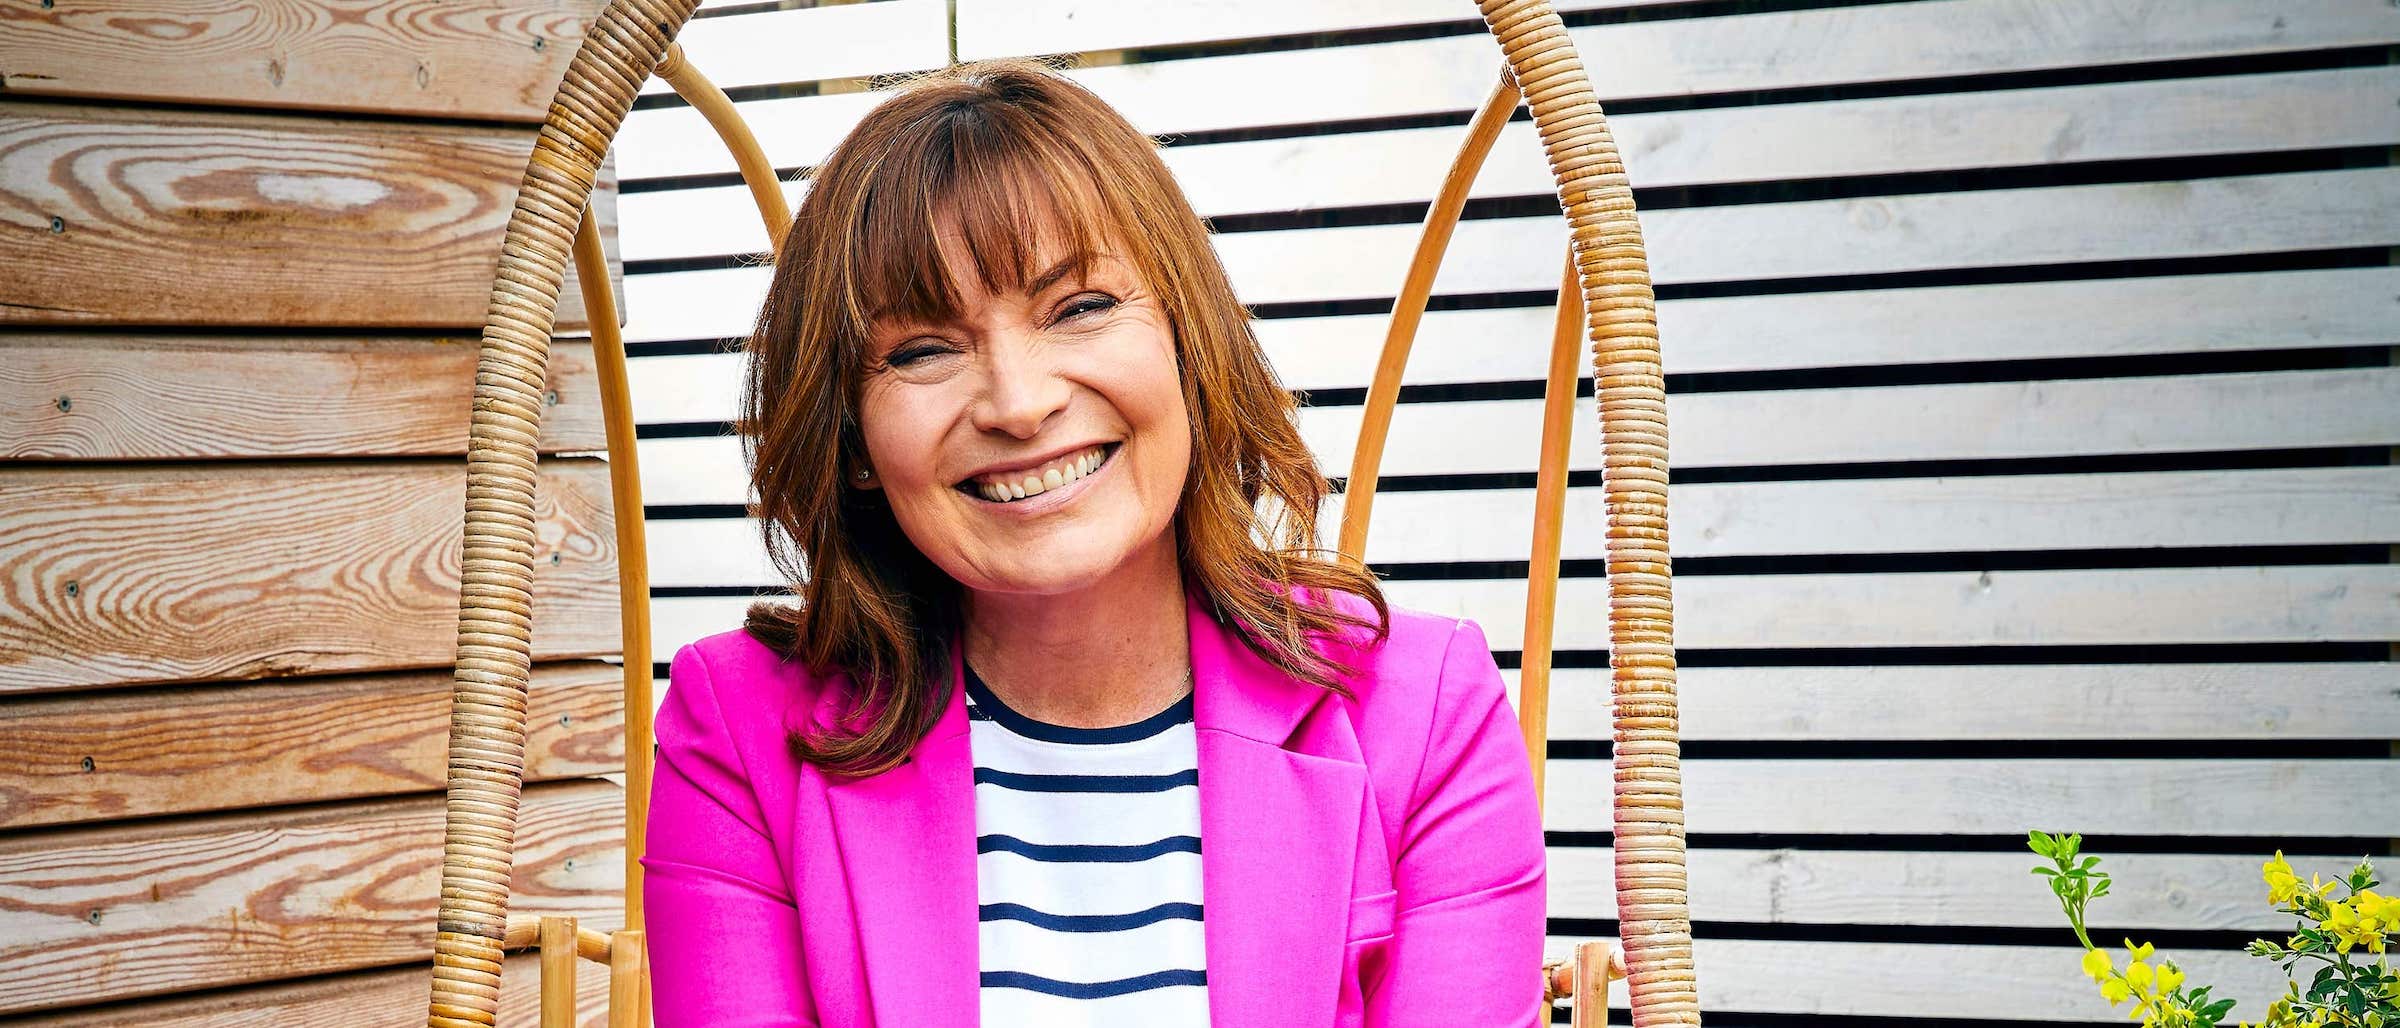 Lorraine kelly on beating ‘mindless comfort eating’ and feeling energised and confident again